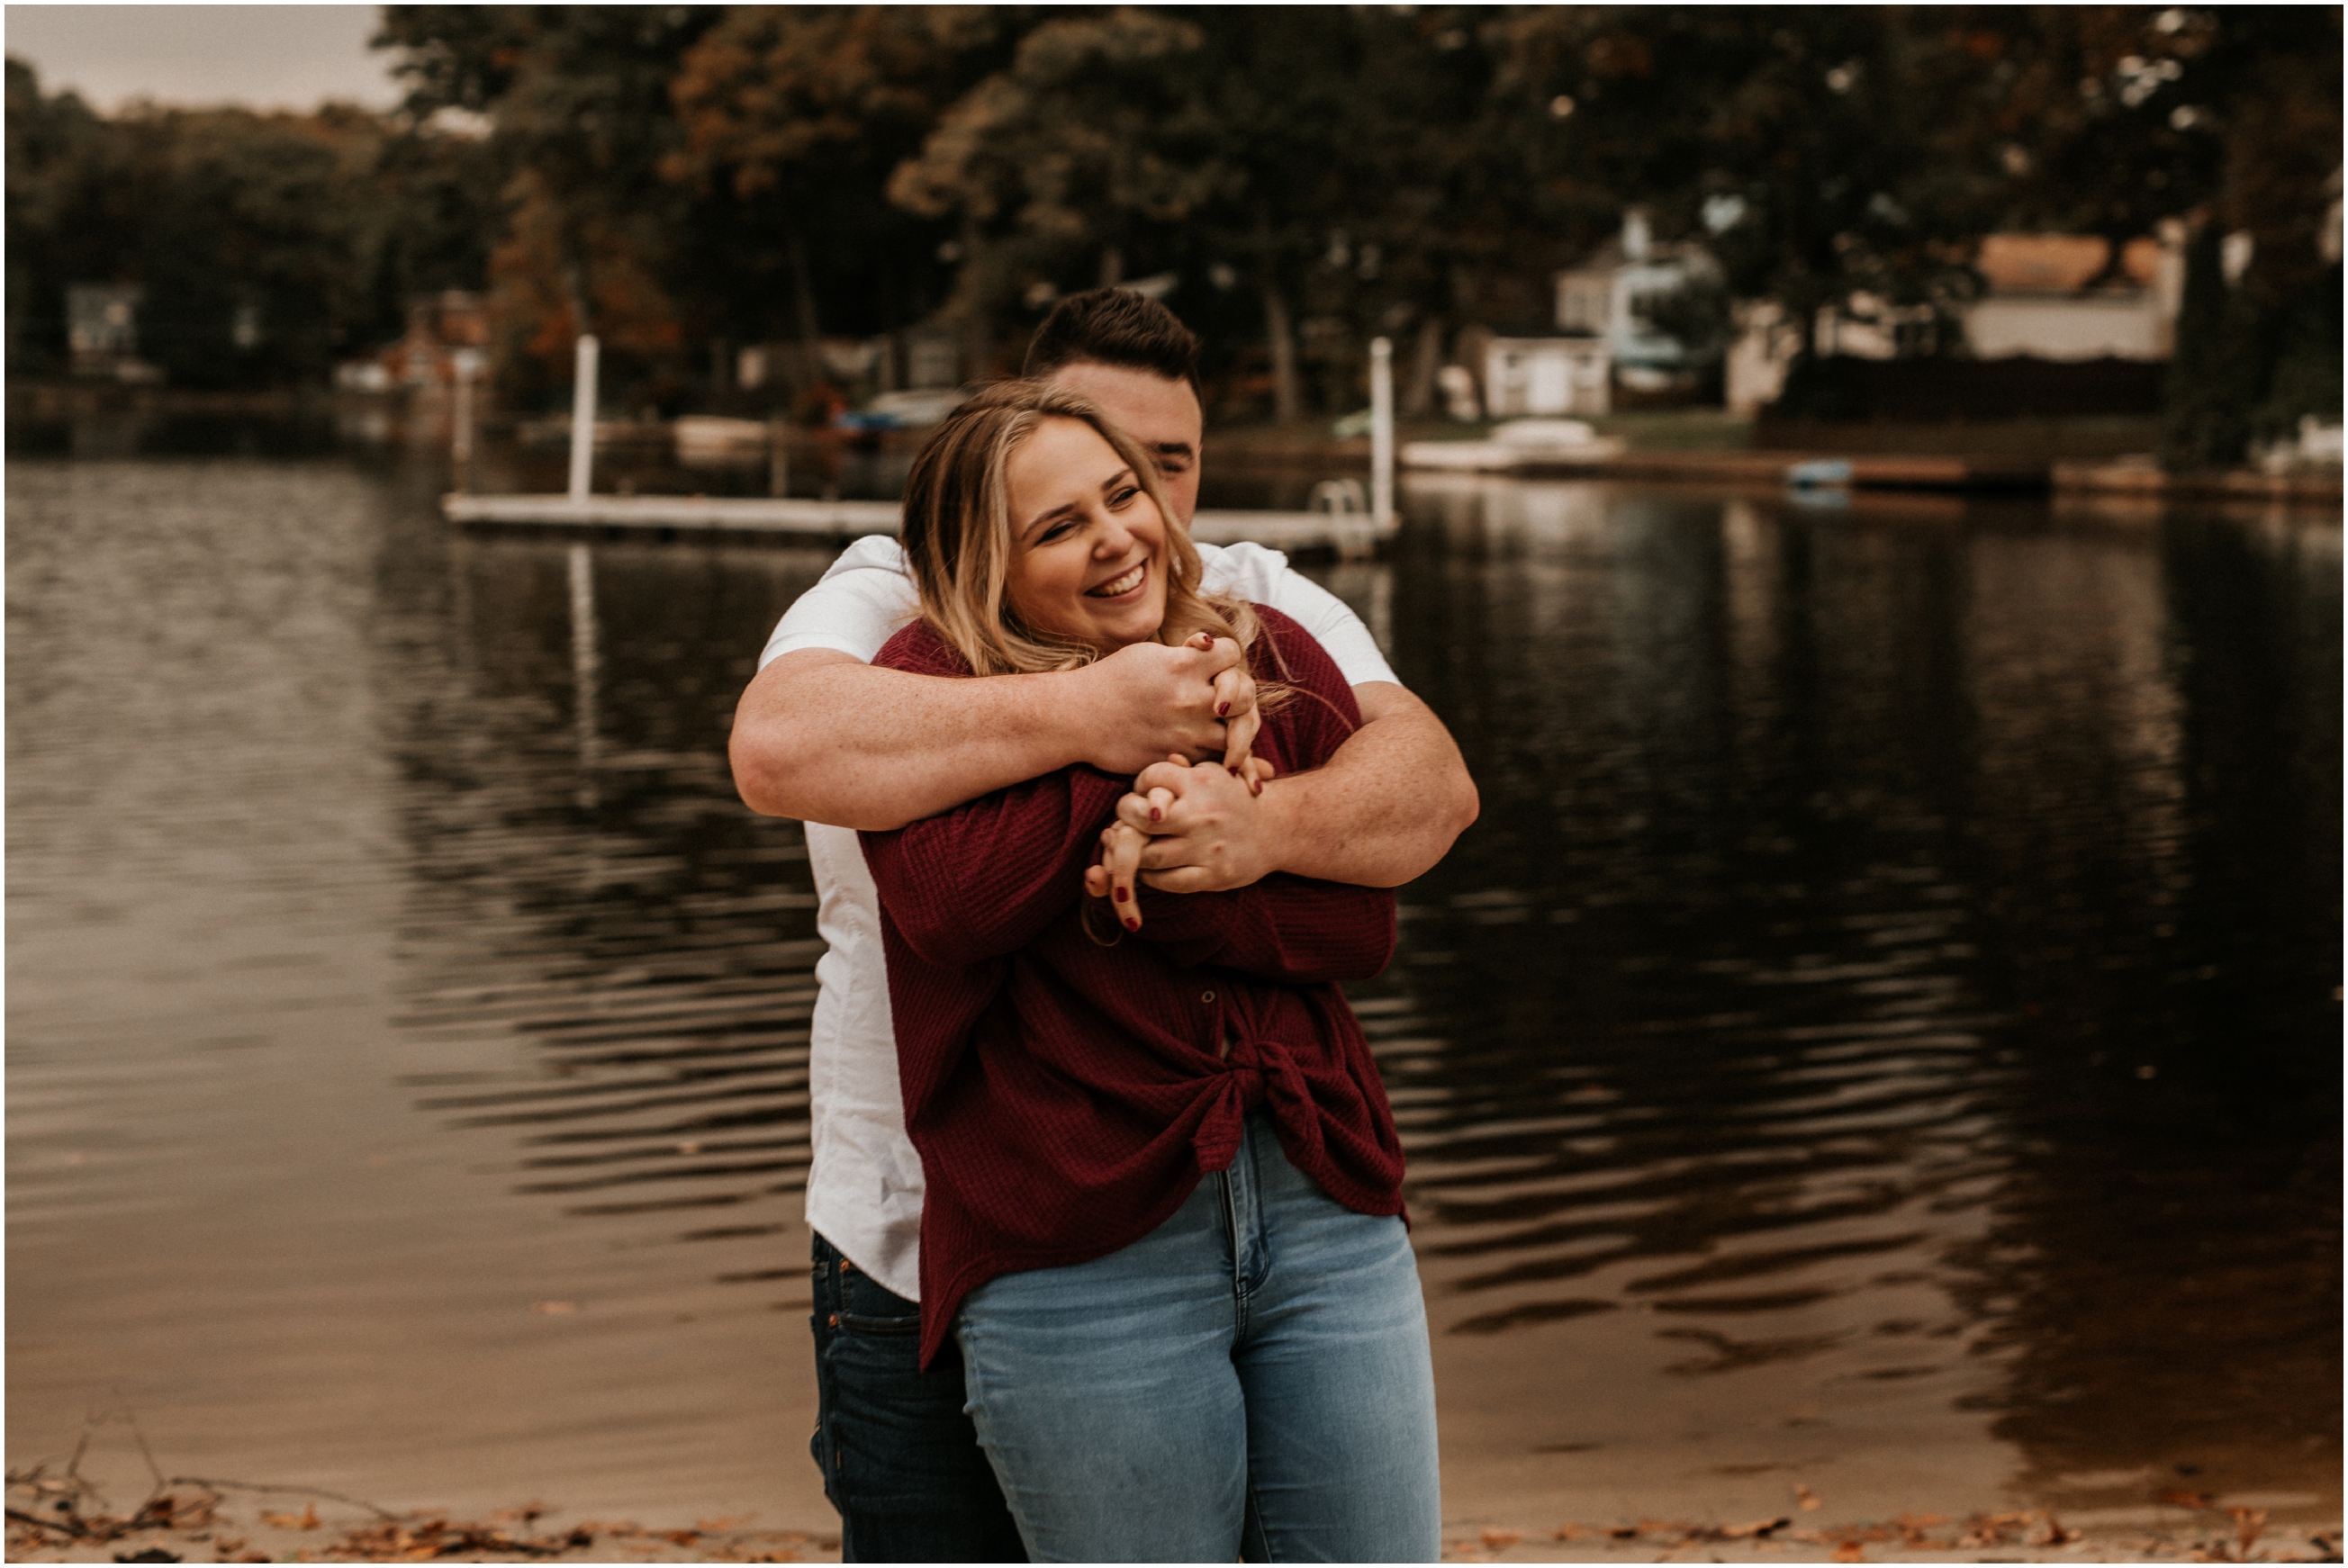 Boonton Downtown Lake House Beach Fall Ice Cream Shop October Engagement Session New Jersey NJ Wedding Photographer